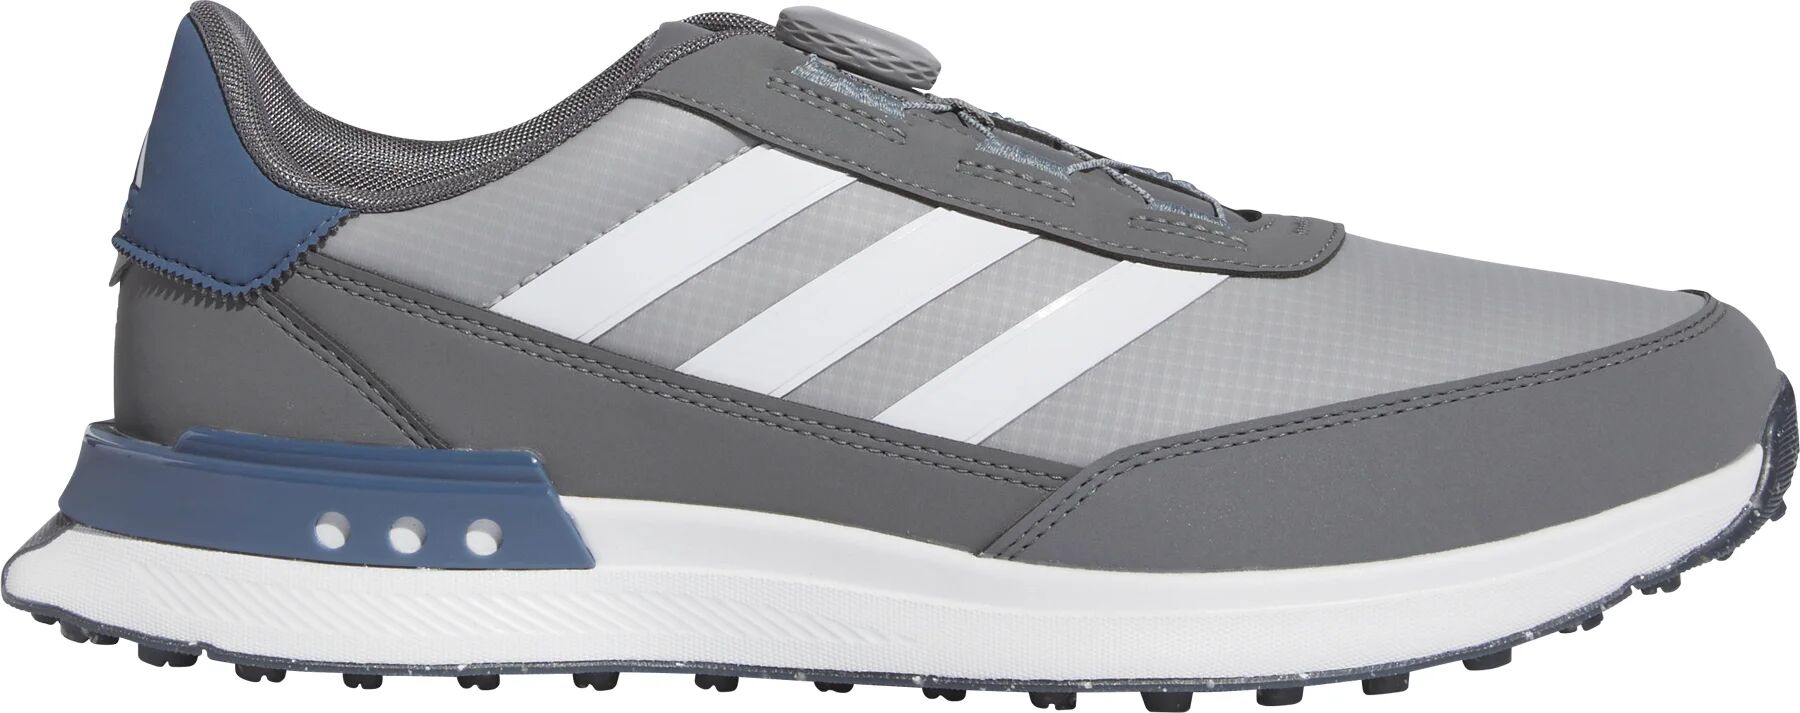 adidas S2G Spikeless BOA 24 Wide Golf Shoes - Grey Four/Cloud White/Preloved Ink - 12.5 - WIDE